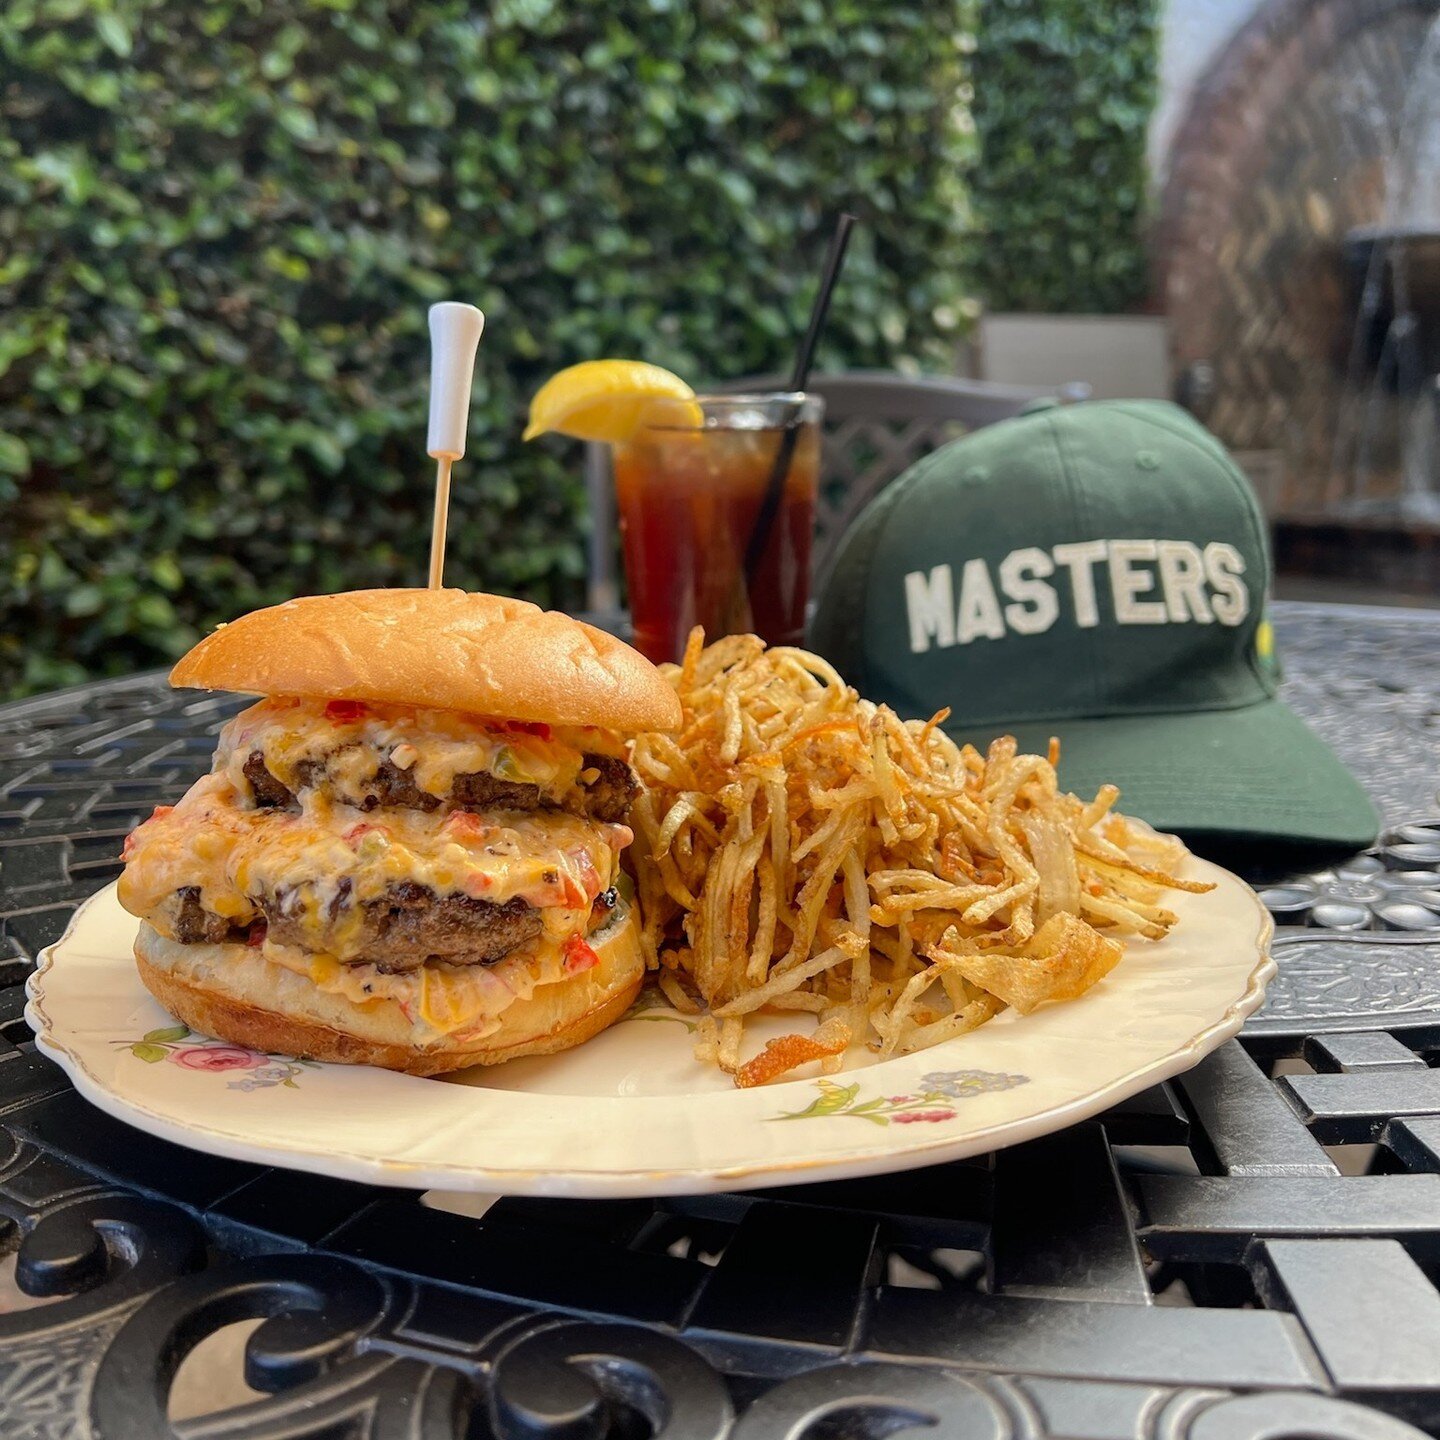 With the 2024 Masters Tournament around the corner, it's only fitting for us to bring  you a tasty Masters-inspired menu to celebrate! ⛳ 🏆

What you're seeing:
PIMENTO SMASH BURGER 
PIMENTO CHEESE BOARD
HOT HONEY CHICKEN BISCUIT

Come enjoy this spe